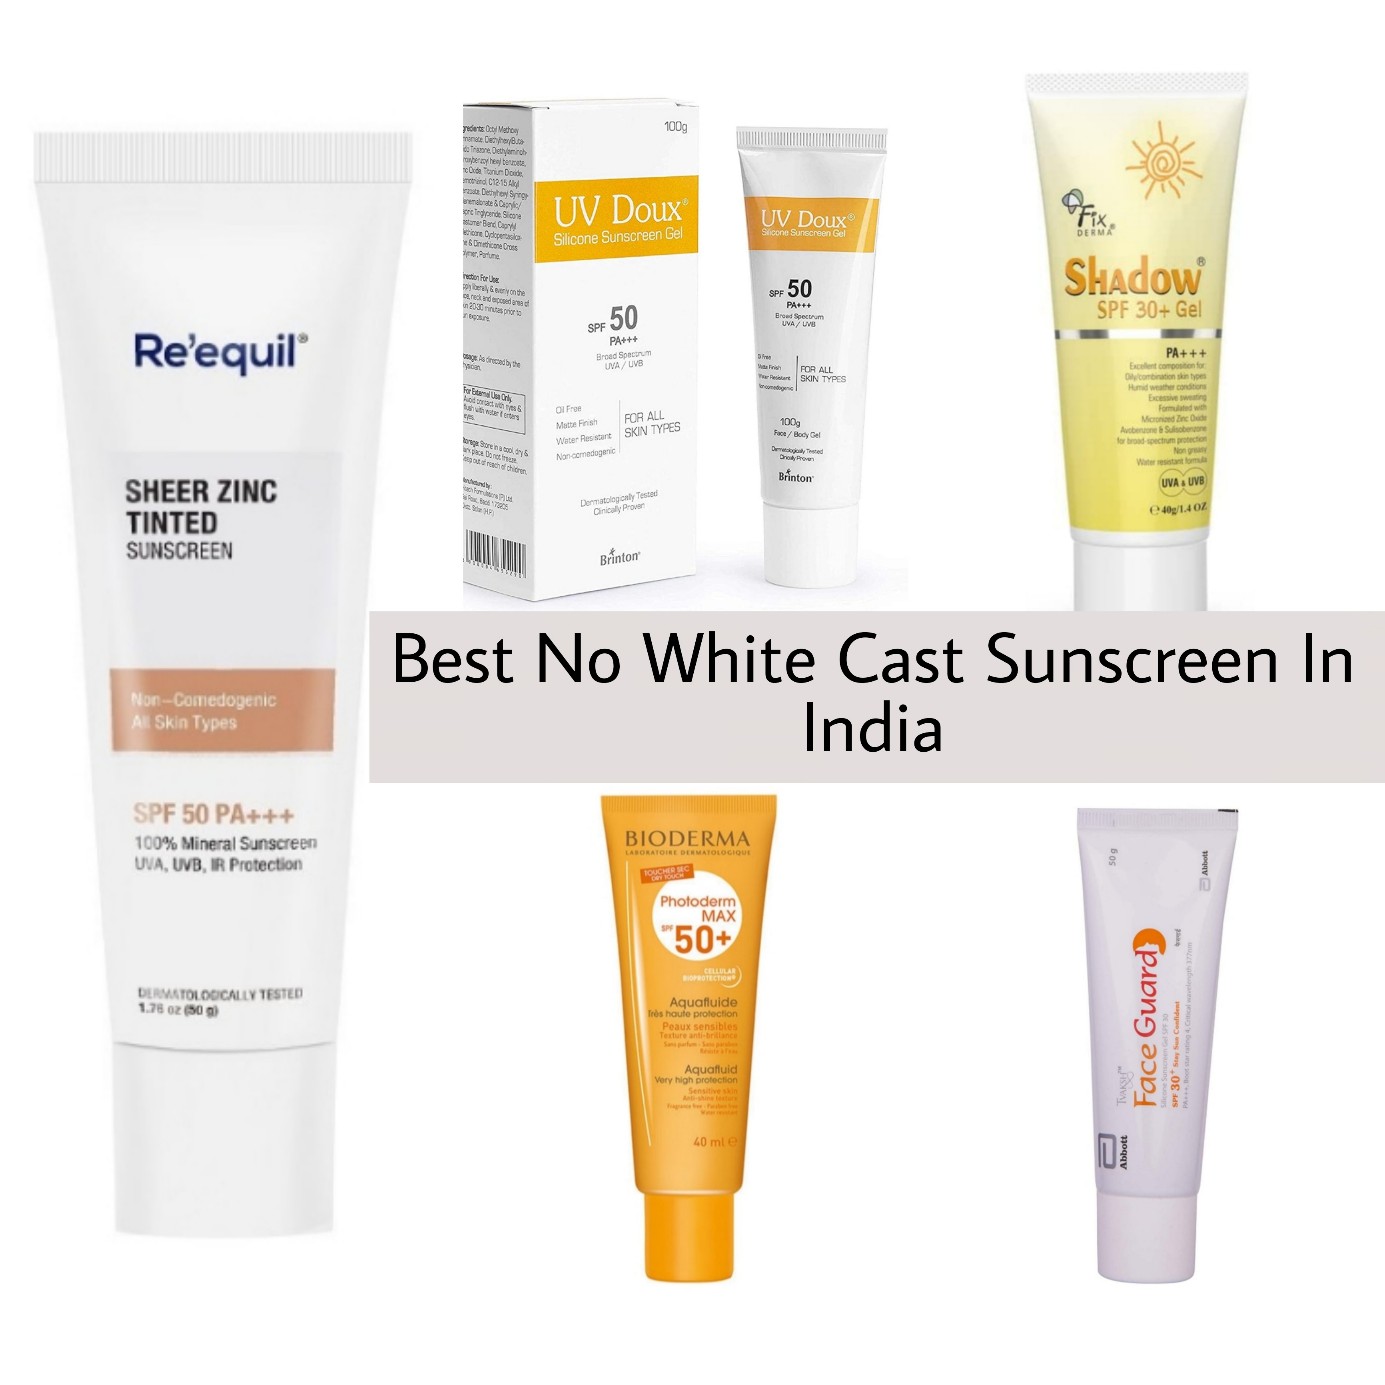 11 Best No White Cast Sunscreen In India For Every Skin Types